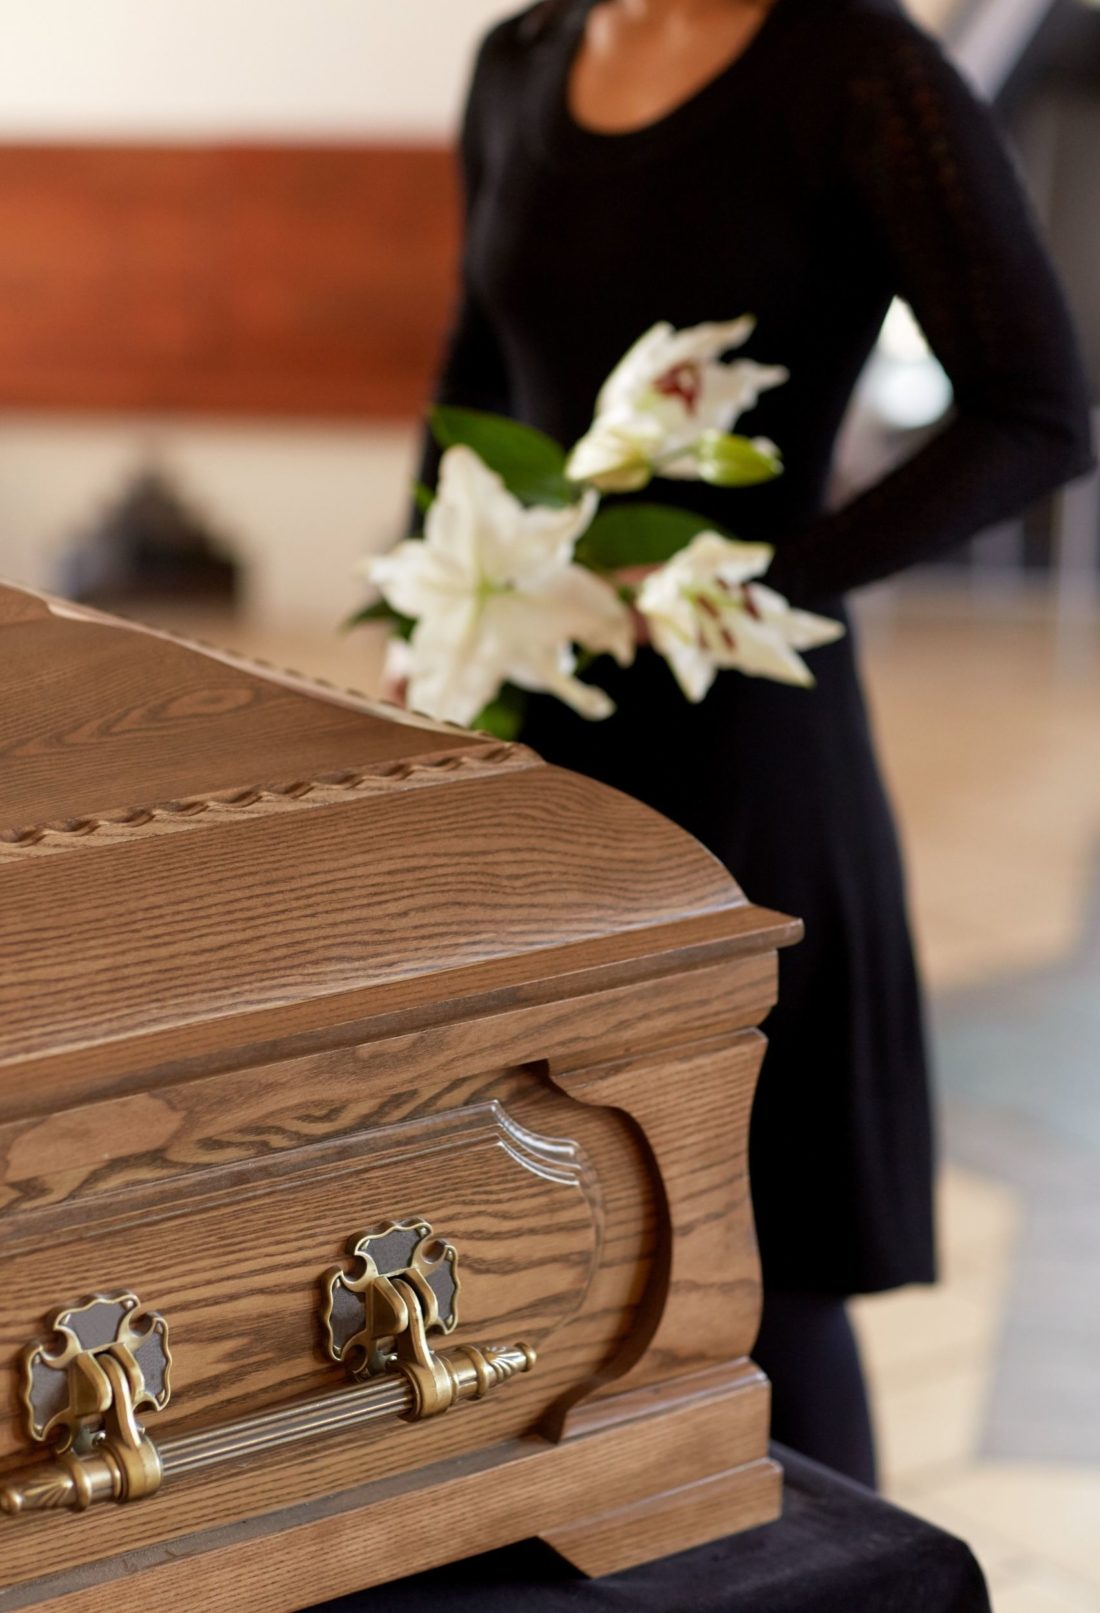 A Checklist In Order To Help You Plan Your Own Funeral